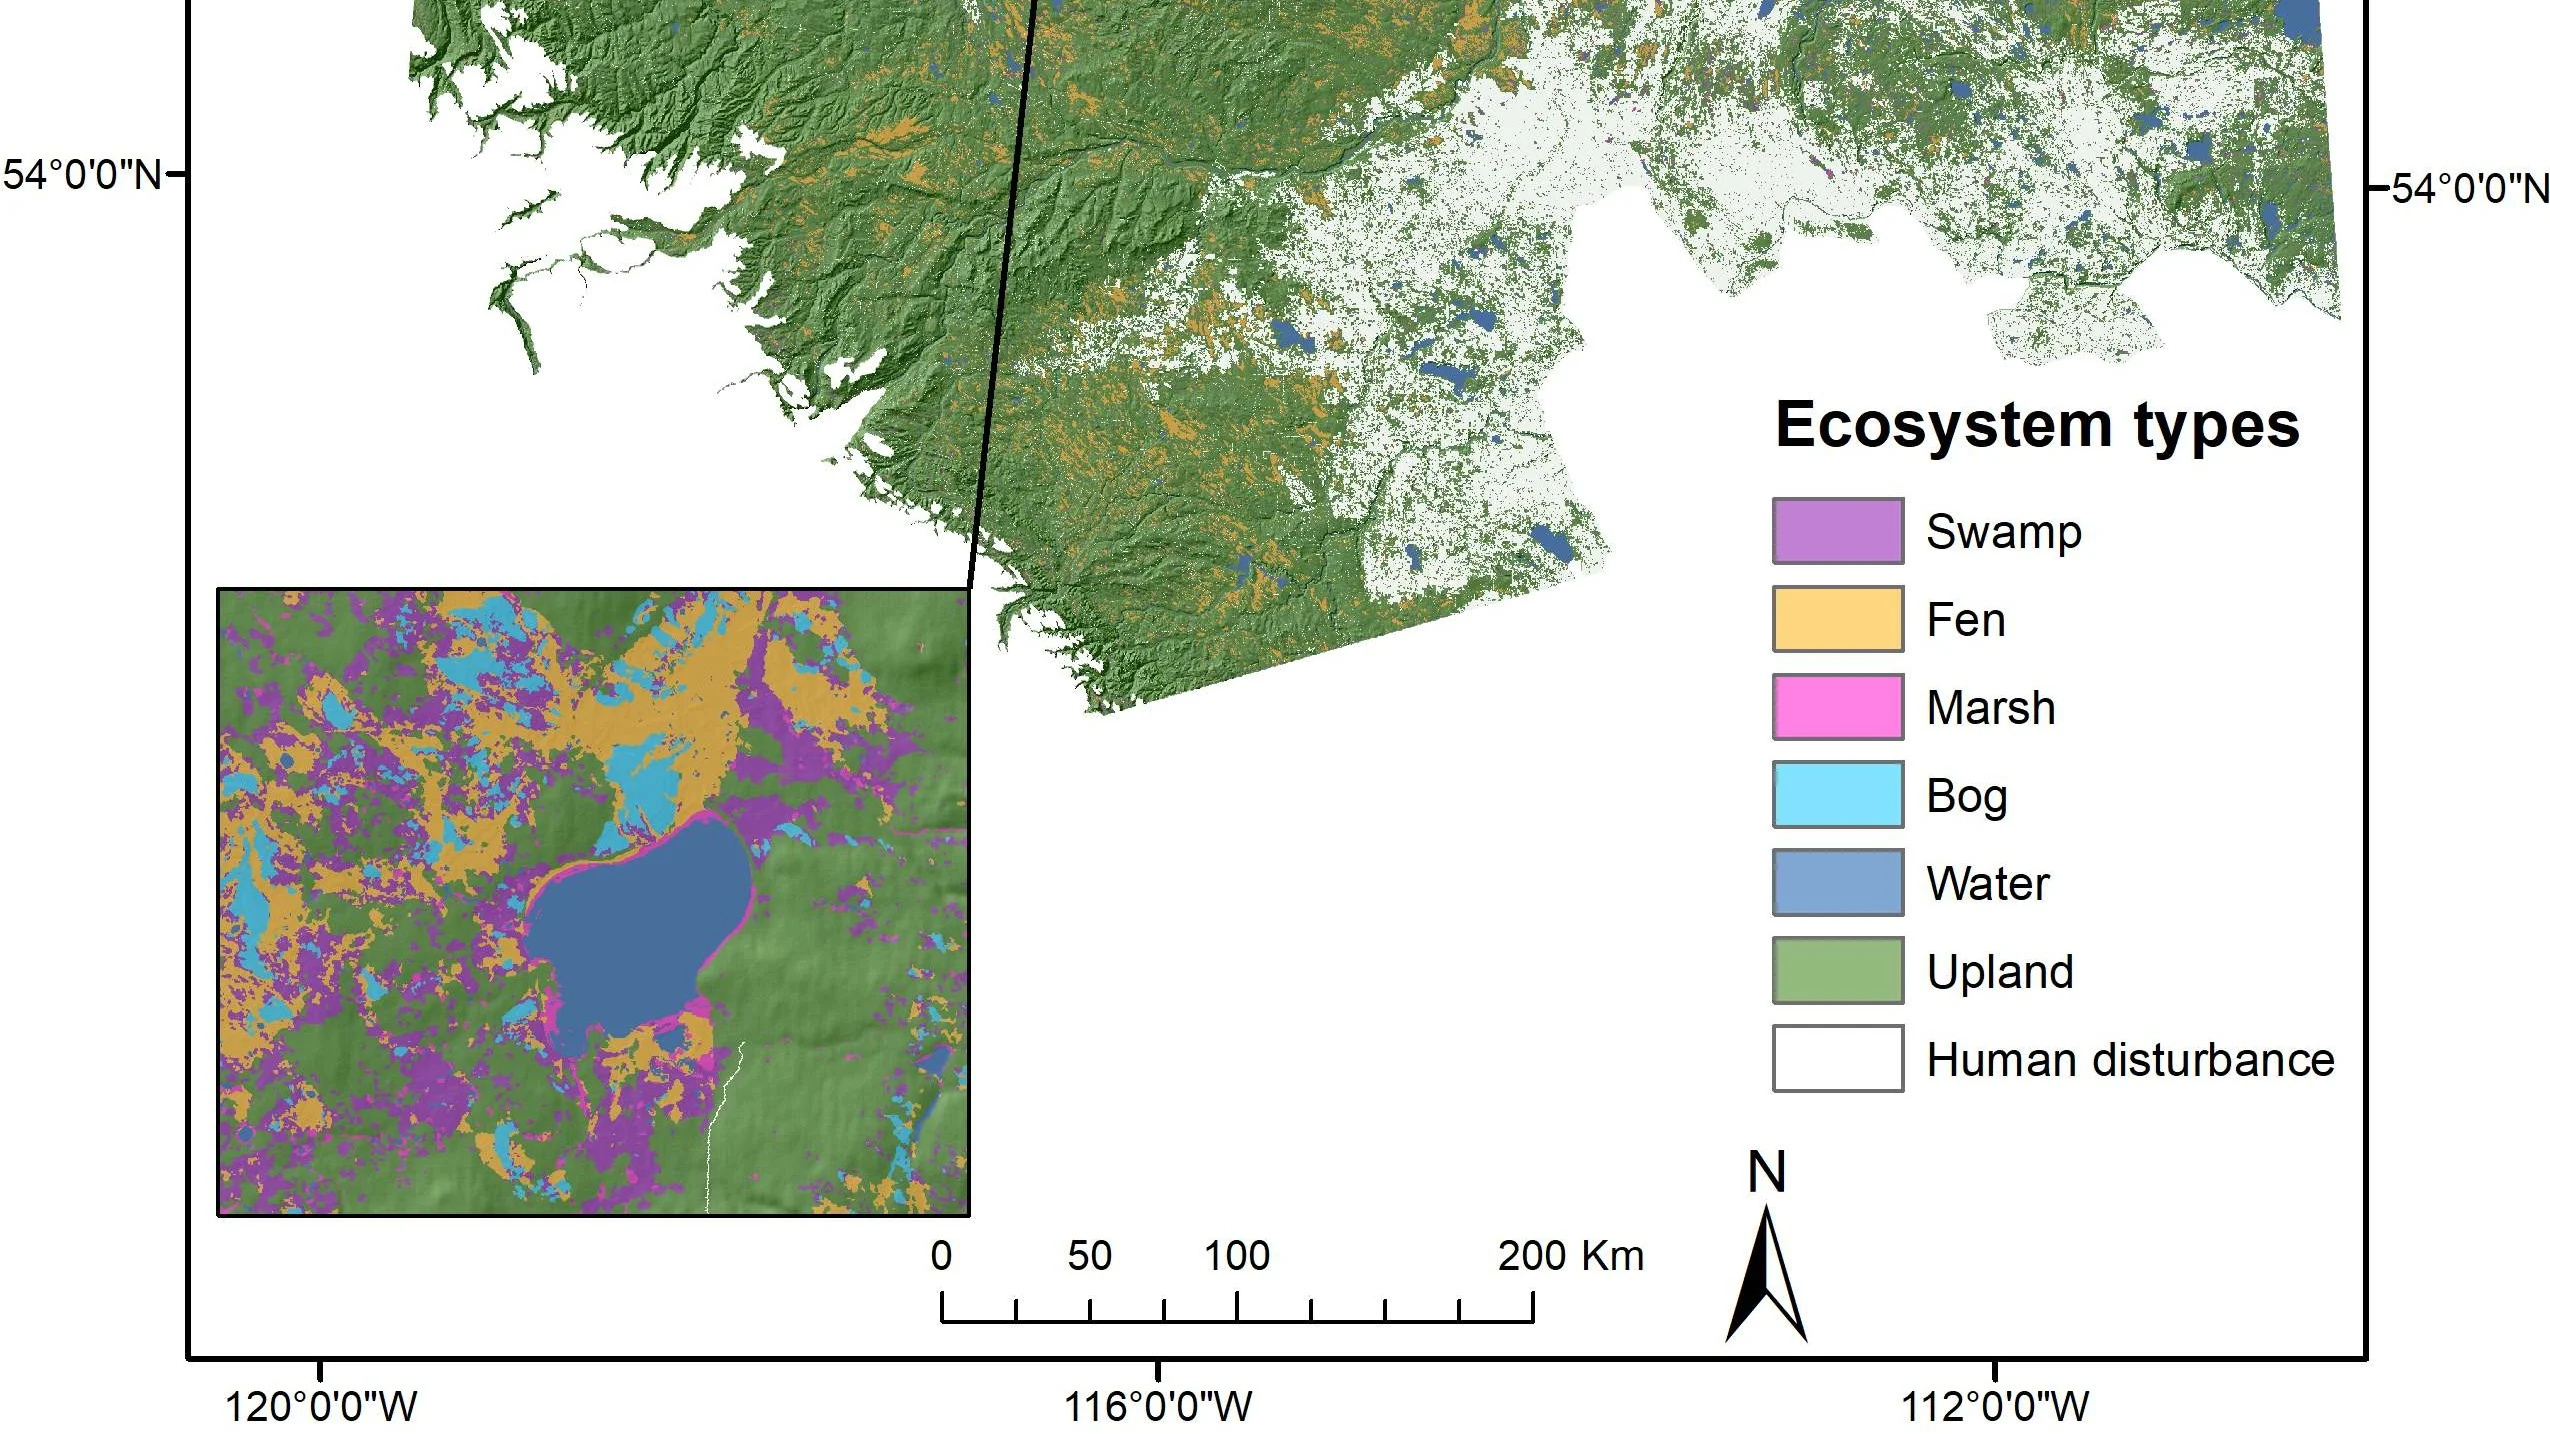 Location of uplands and wetlands in AB boreal w zoomed in map